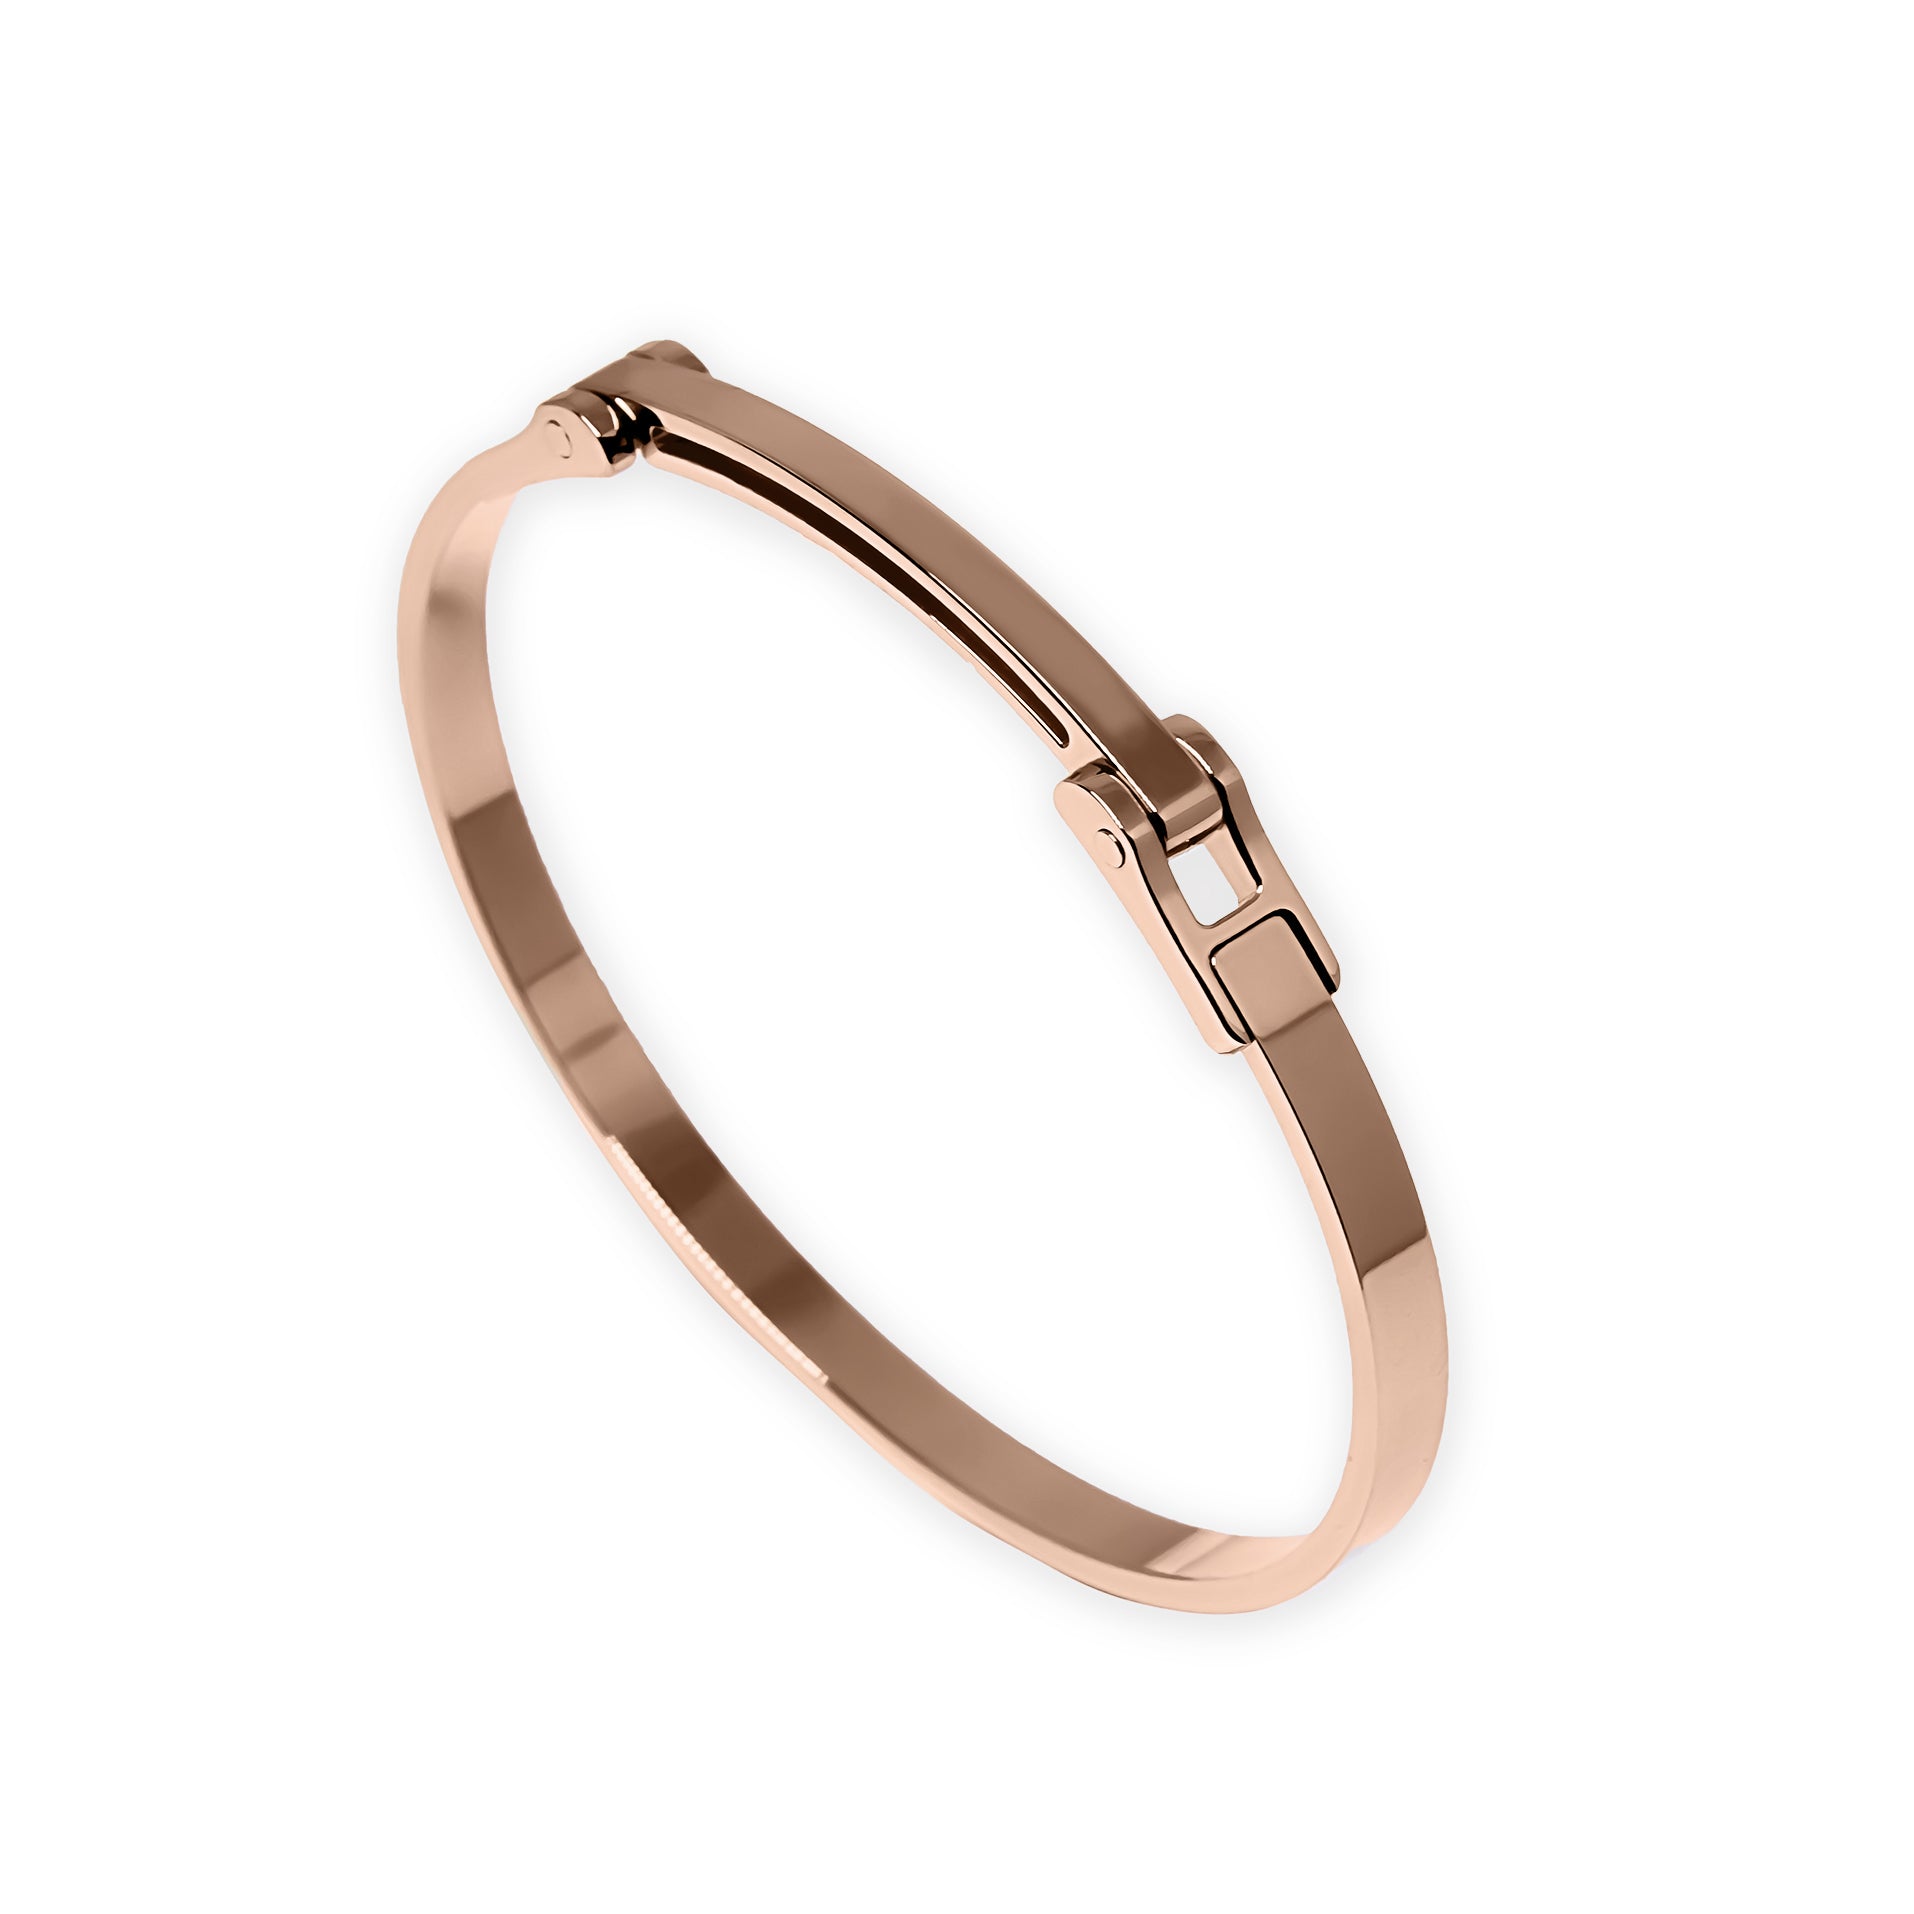 Bracelet EARTH IS ROUND 4mm with hinge red gold 18k 750